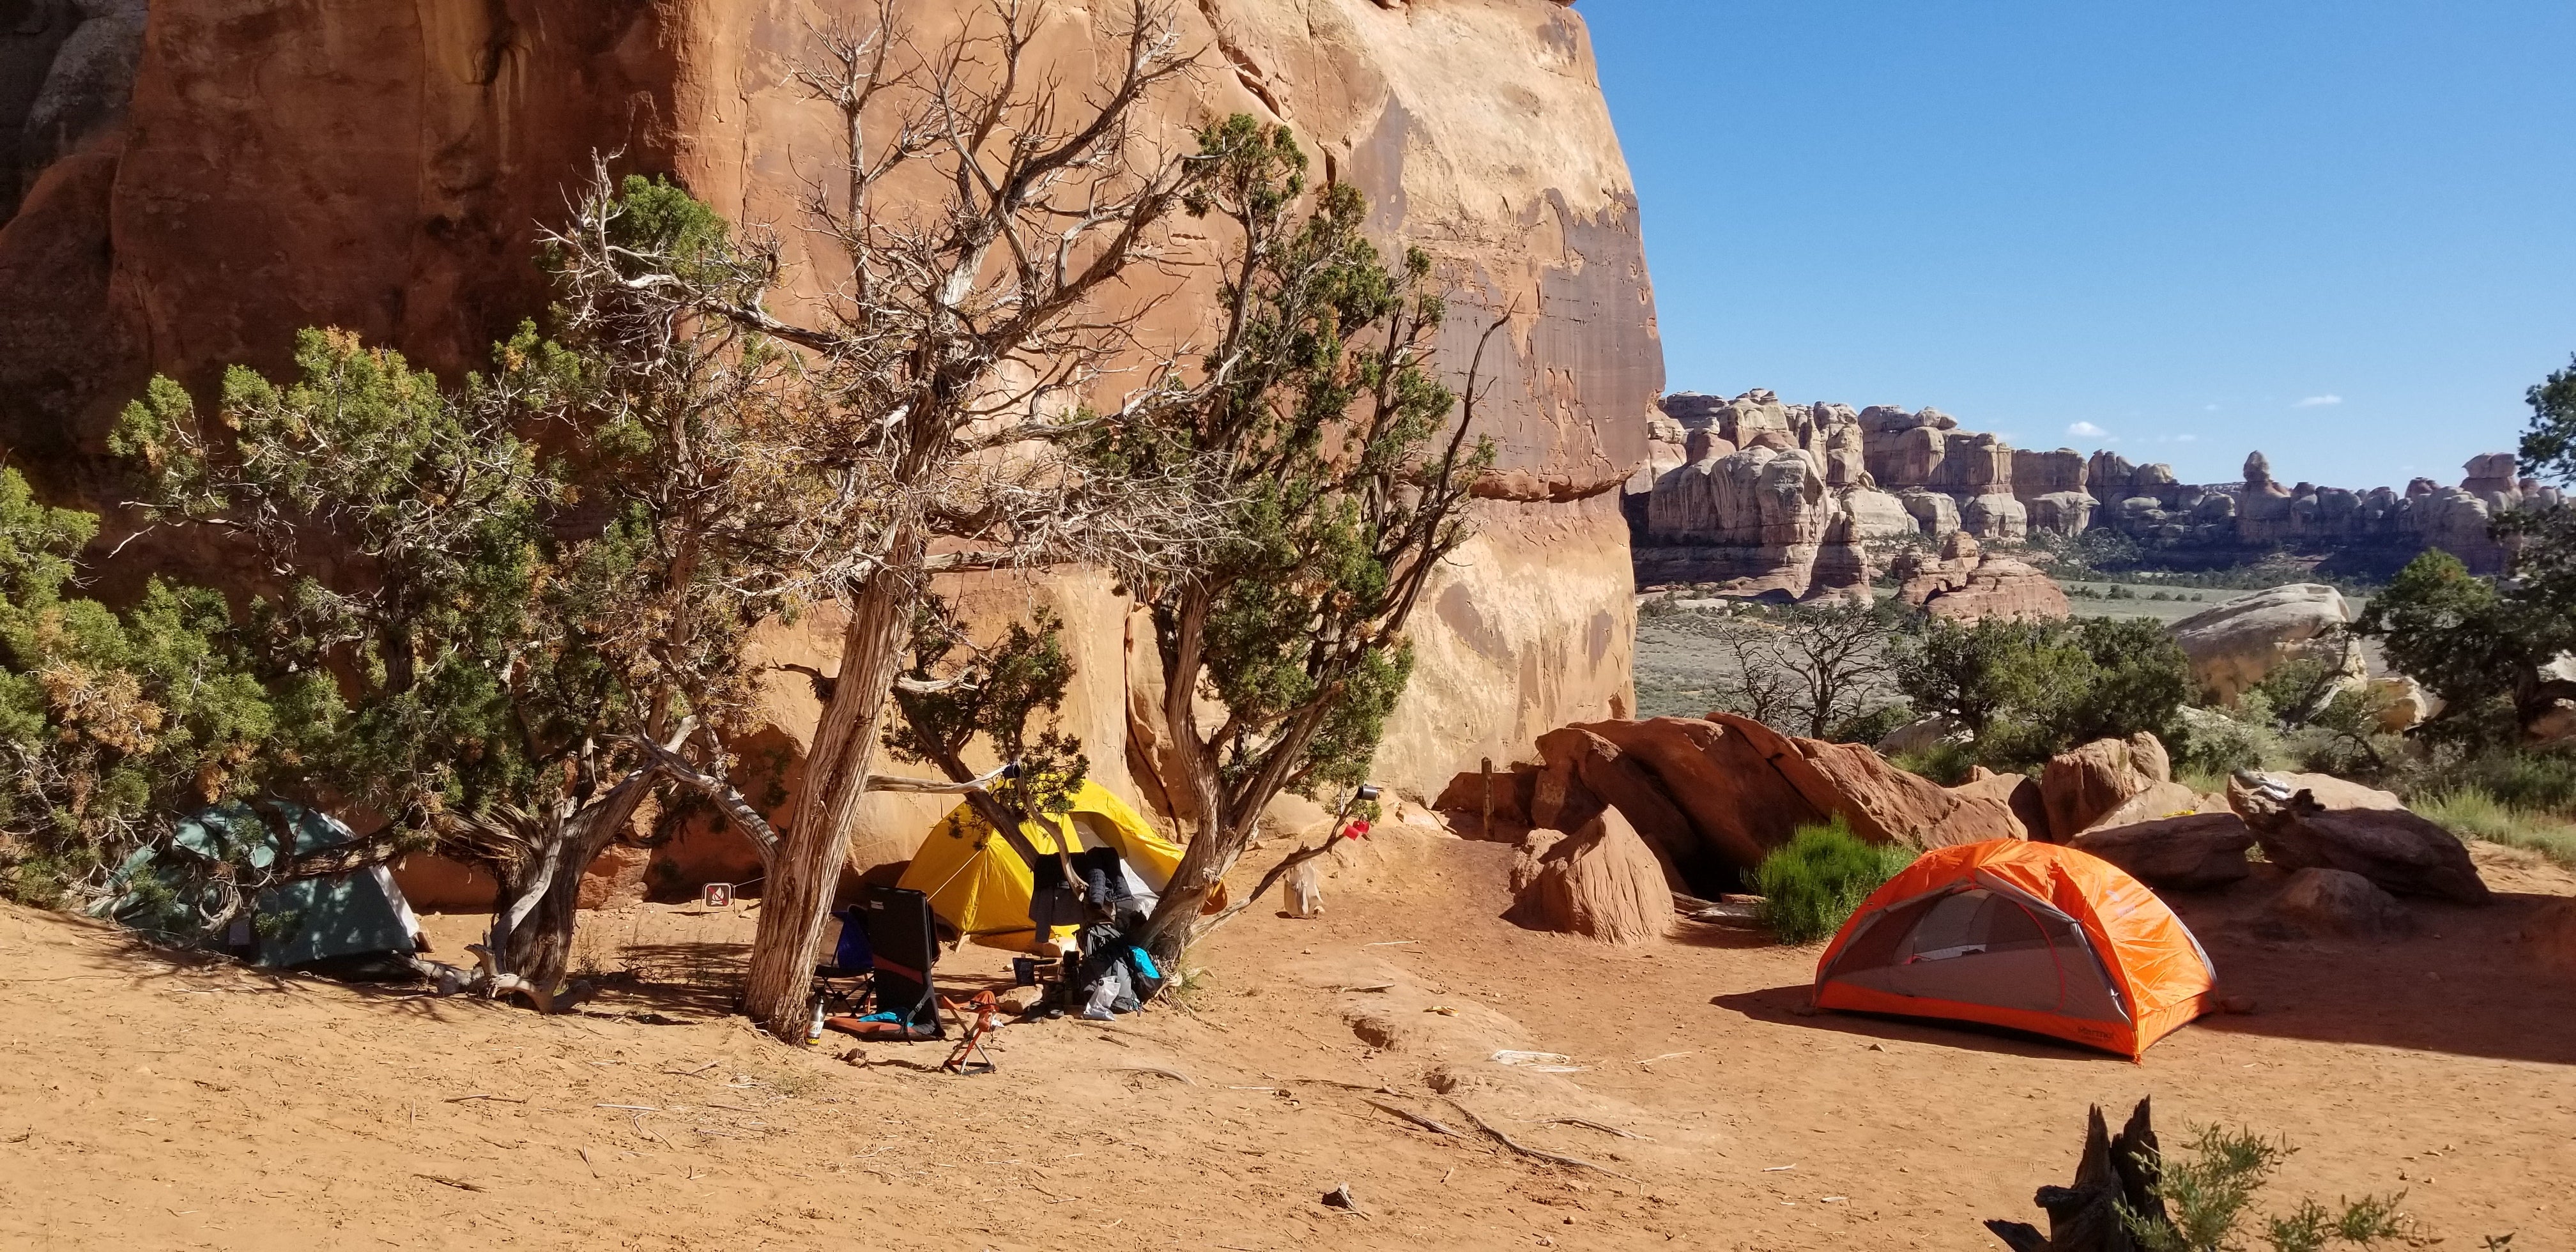 Camper submitted image from Chesler Park 1 (CP1) Backcountry Campsite, Needles District of Canyonlands National Park - 5